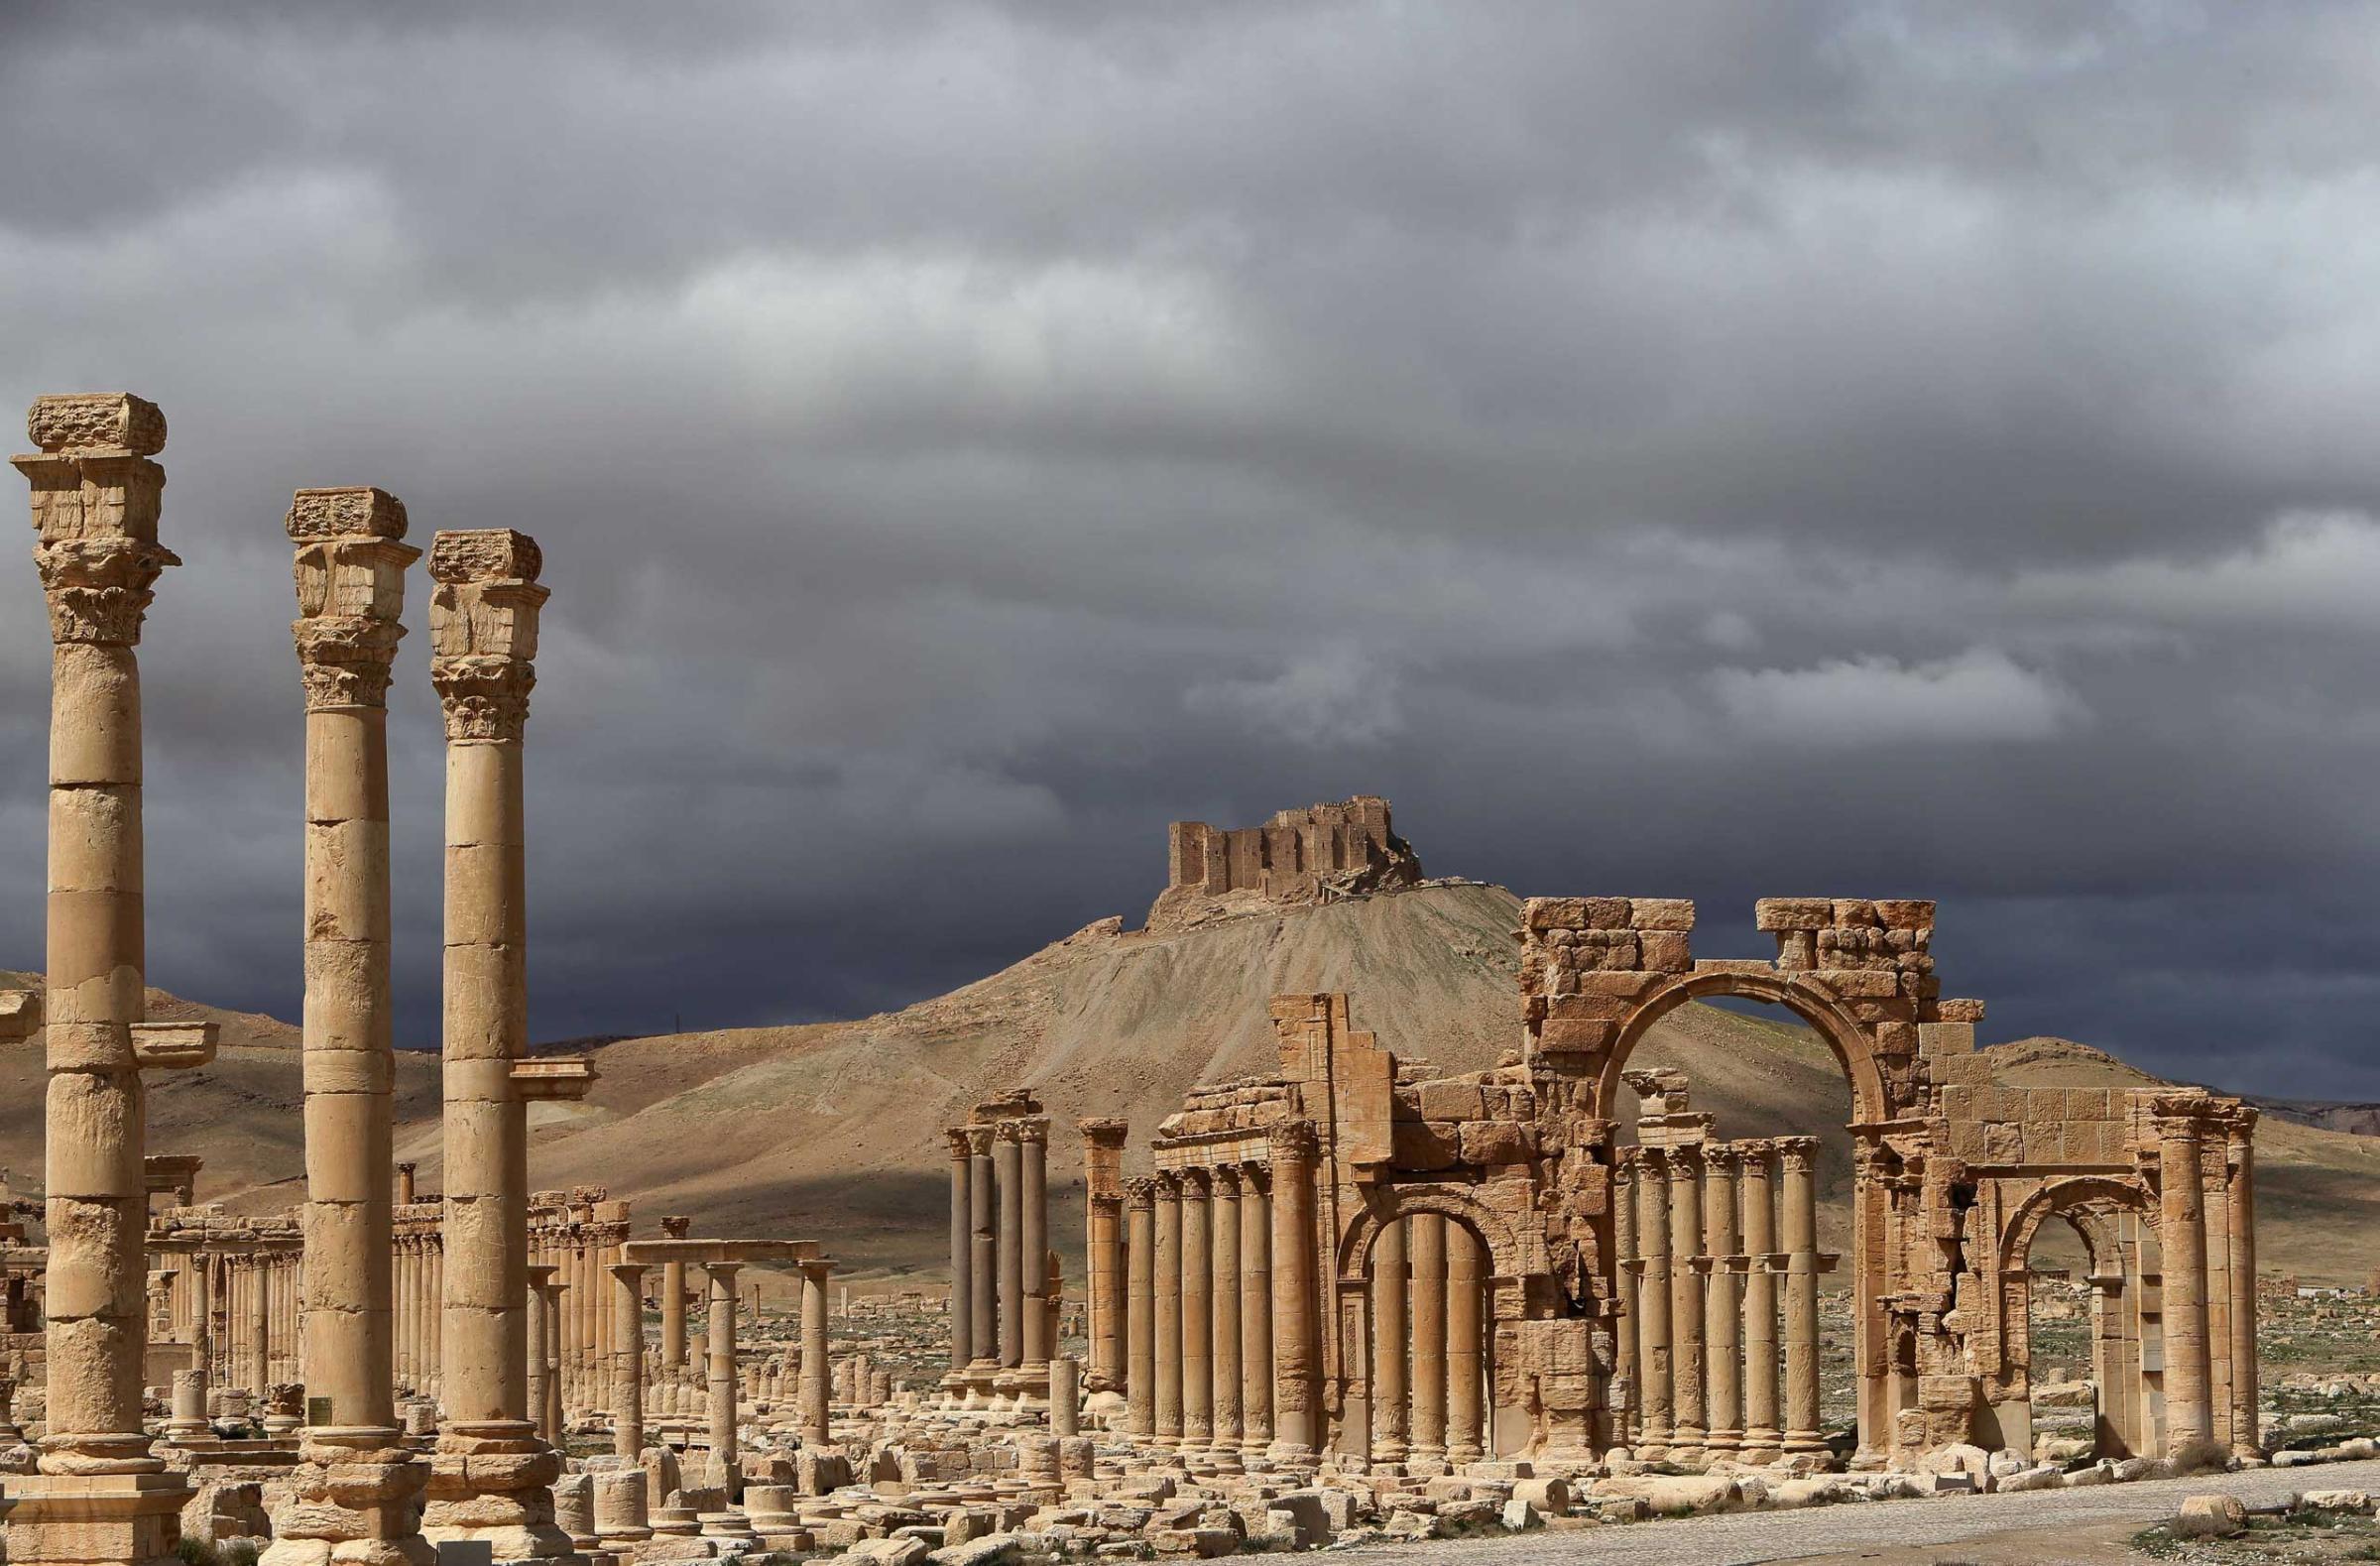 A partial view of the ancient oasis city of Palmyra, Syria in 2014.